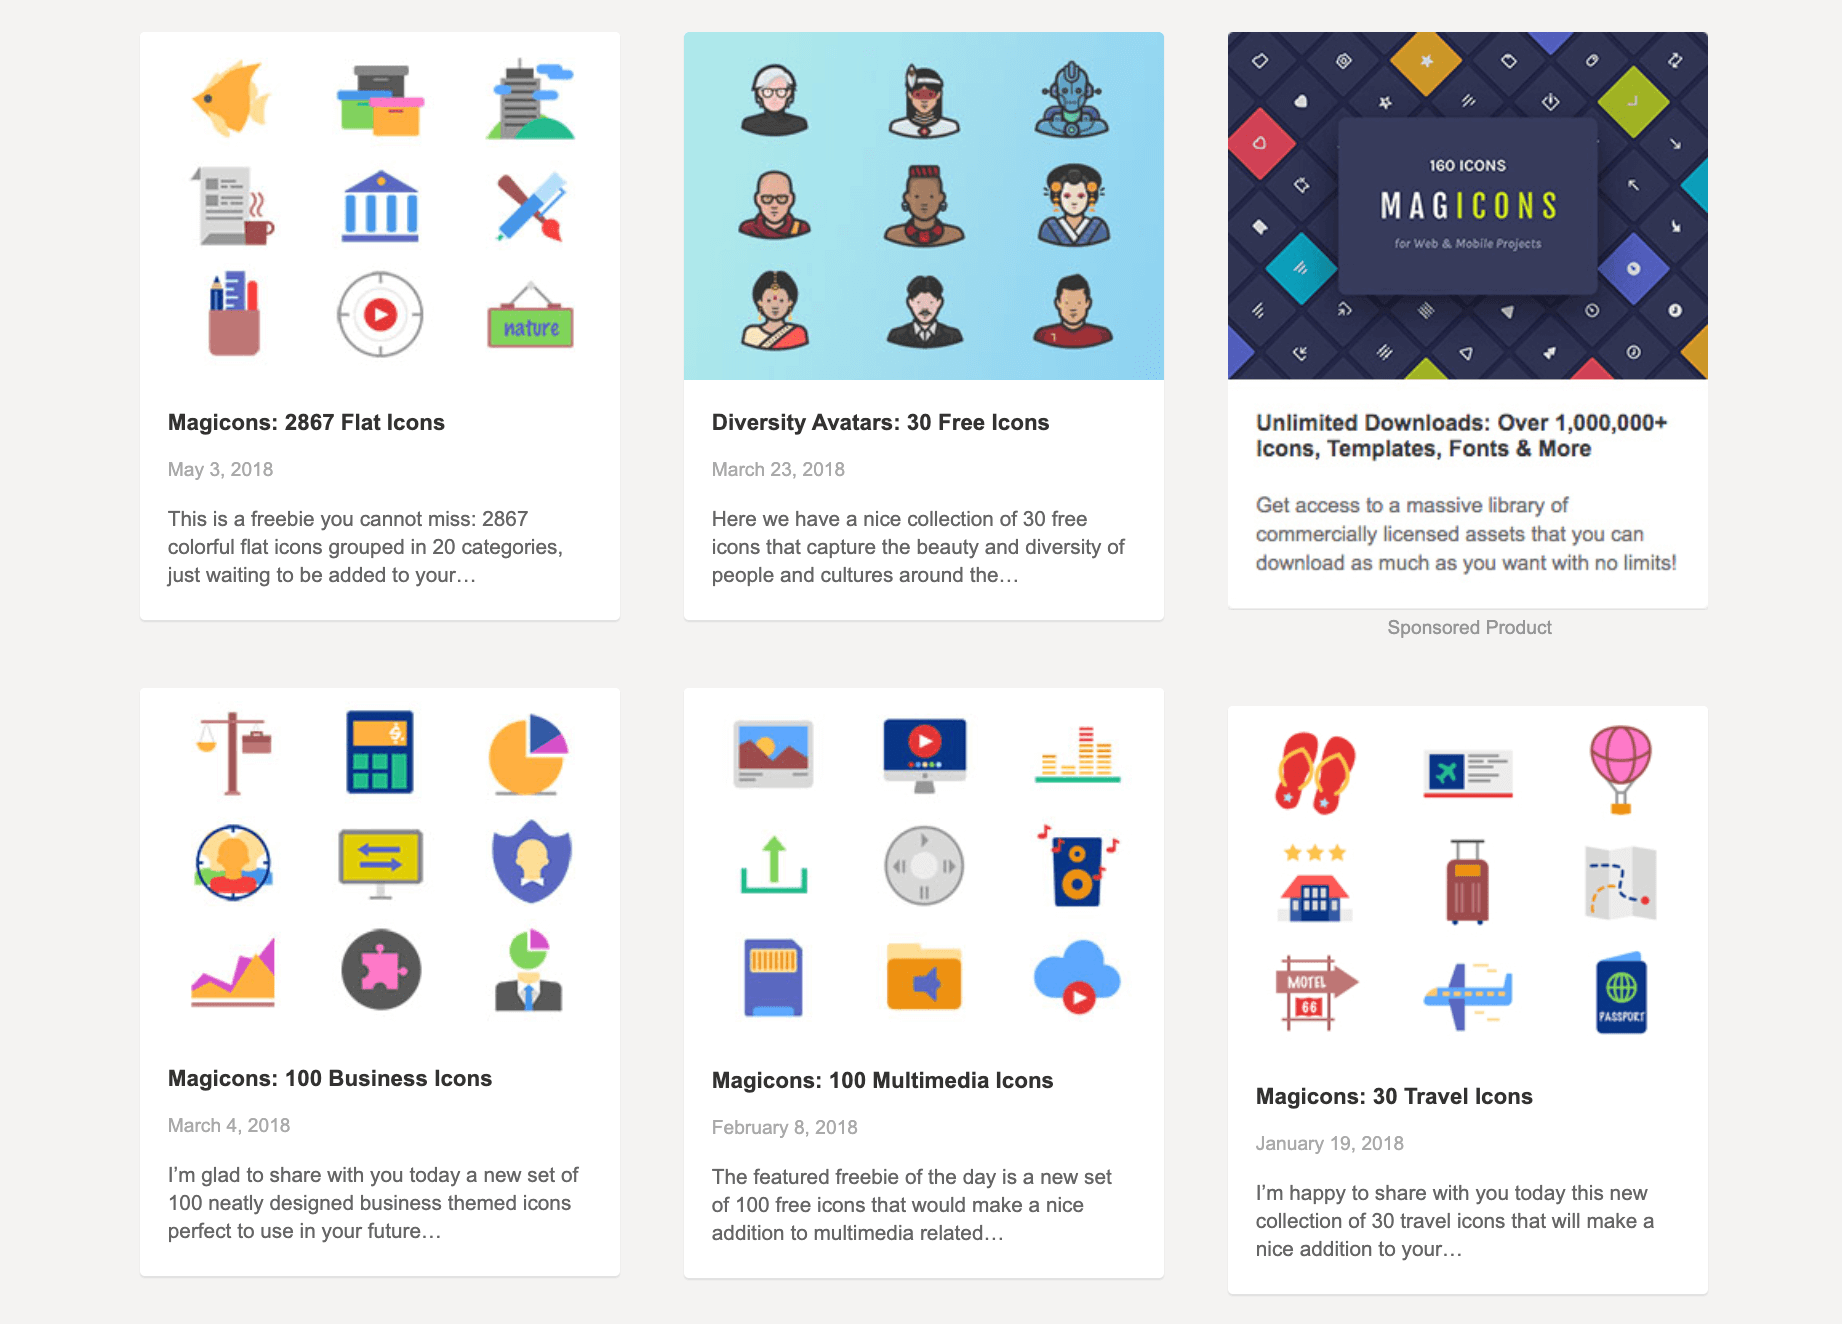 New arrivals - Free commerce icons